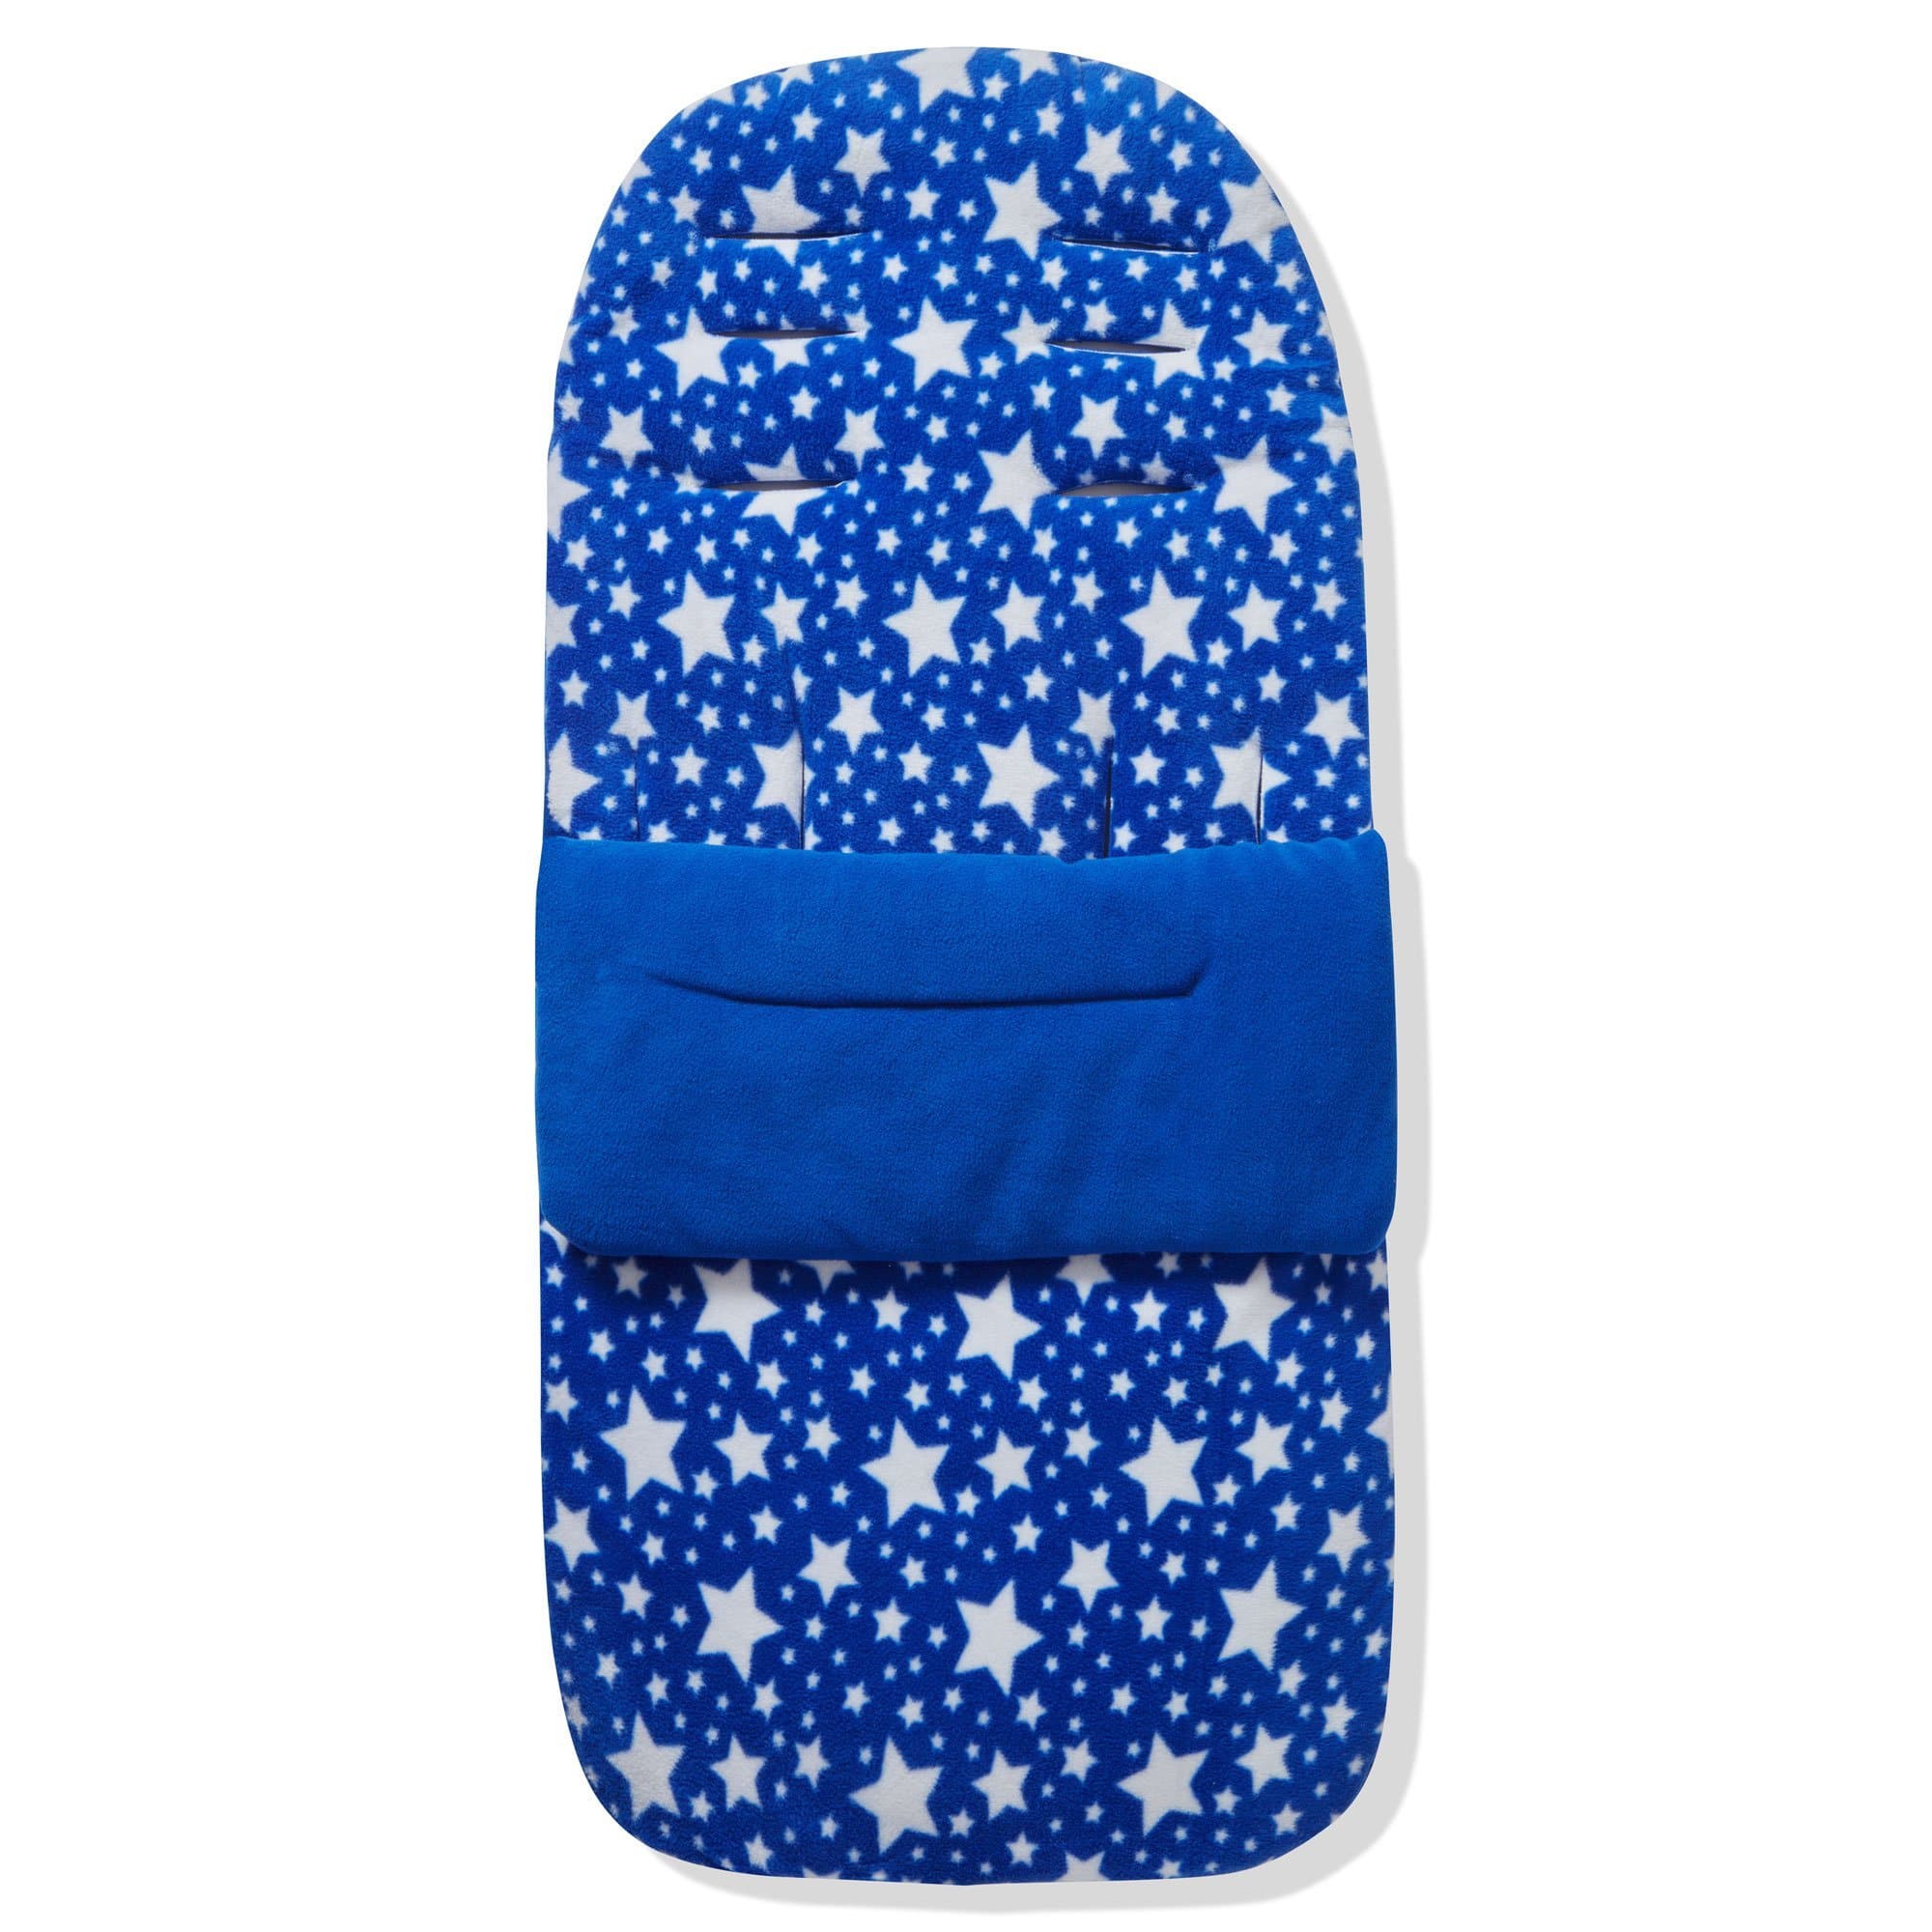 Fleece Footmuff / Cosy Toes Compatible with Babywelt - For Your Little One